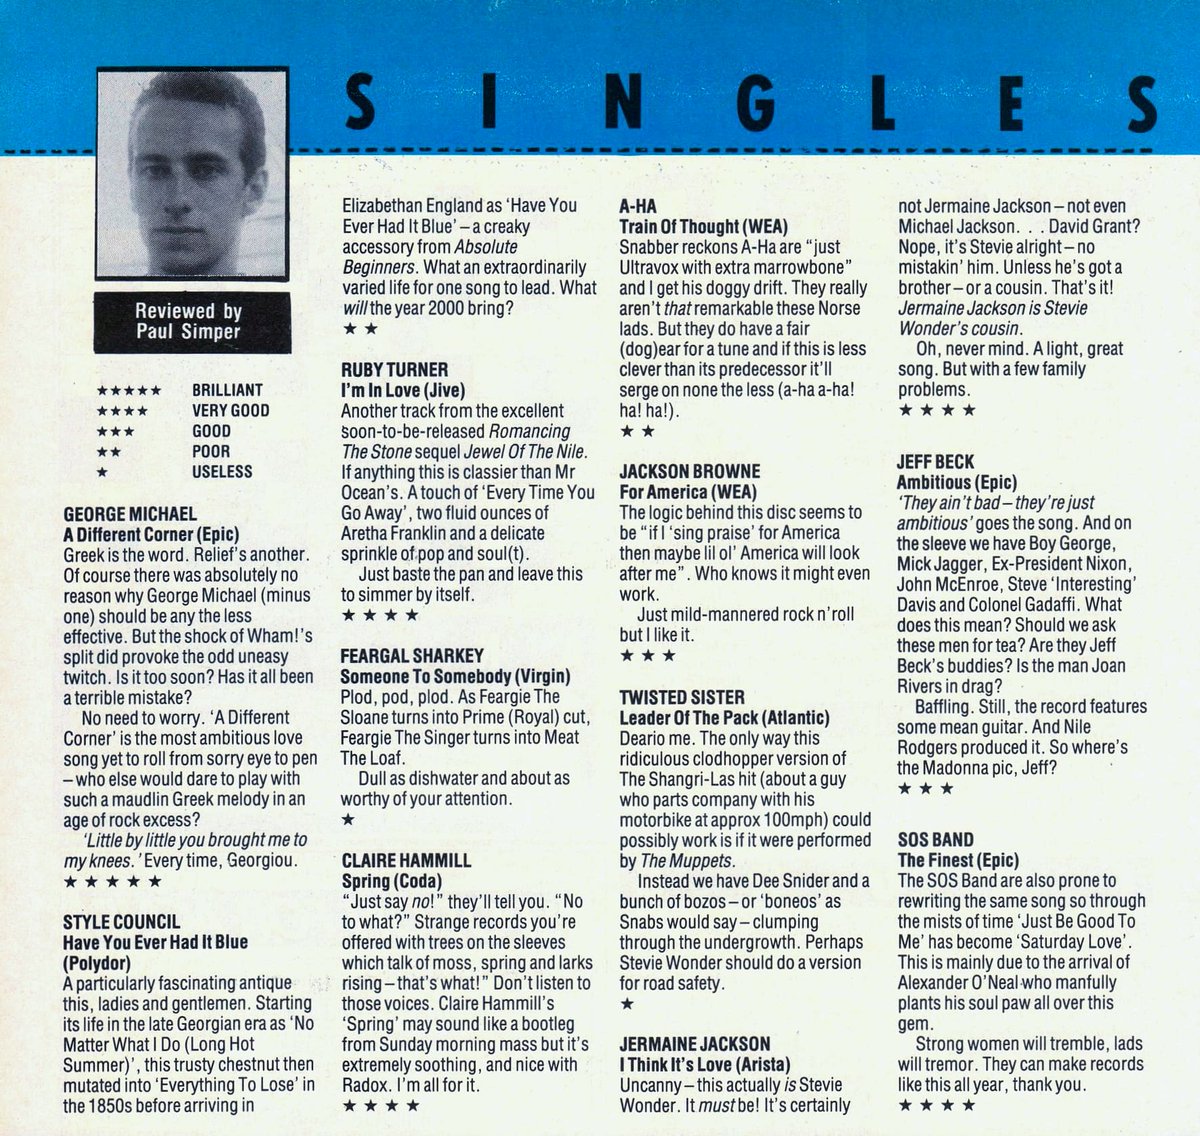 The single reviews in #NumberOneMagazine this week in 1986. Only 2 stars for #Aha's #TrainOfThought. I'm appalled. 😱😱😱